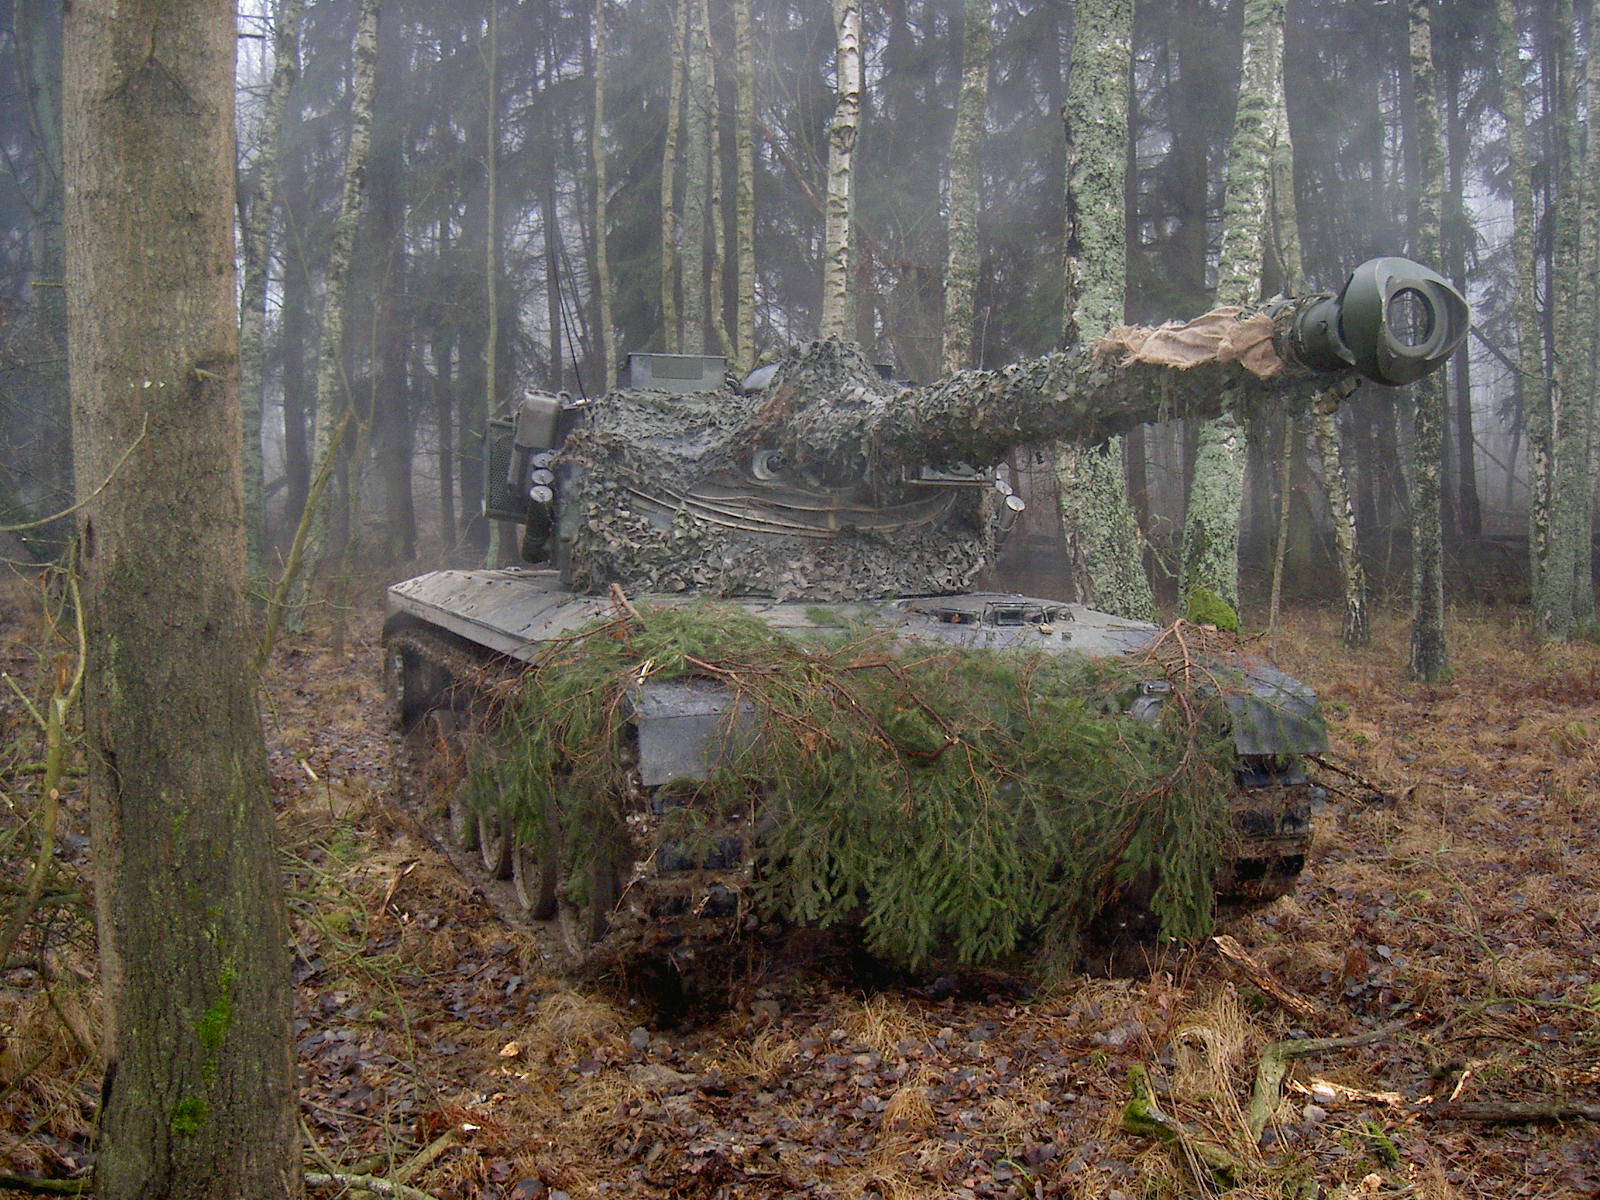 Military Tanks In The Woods Background